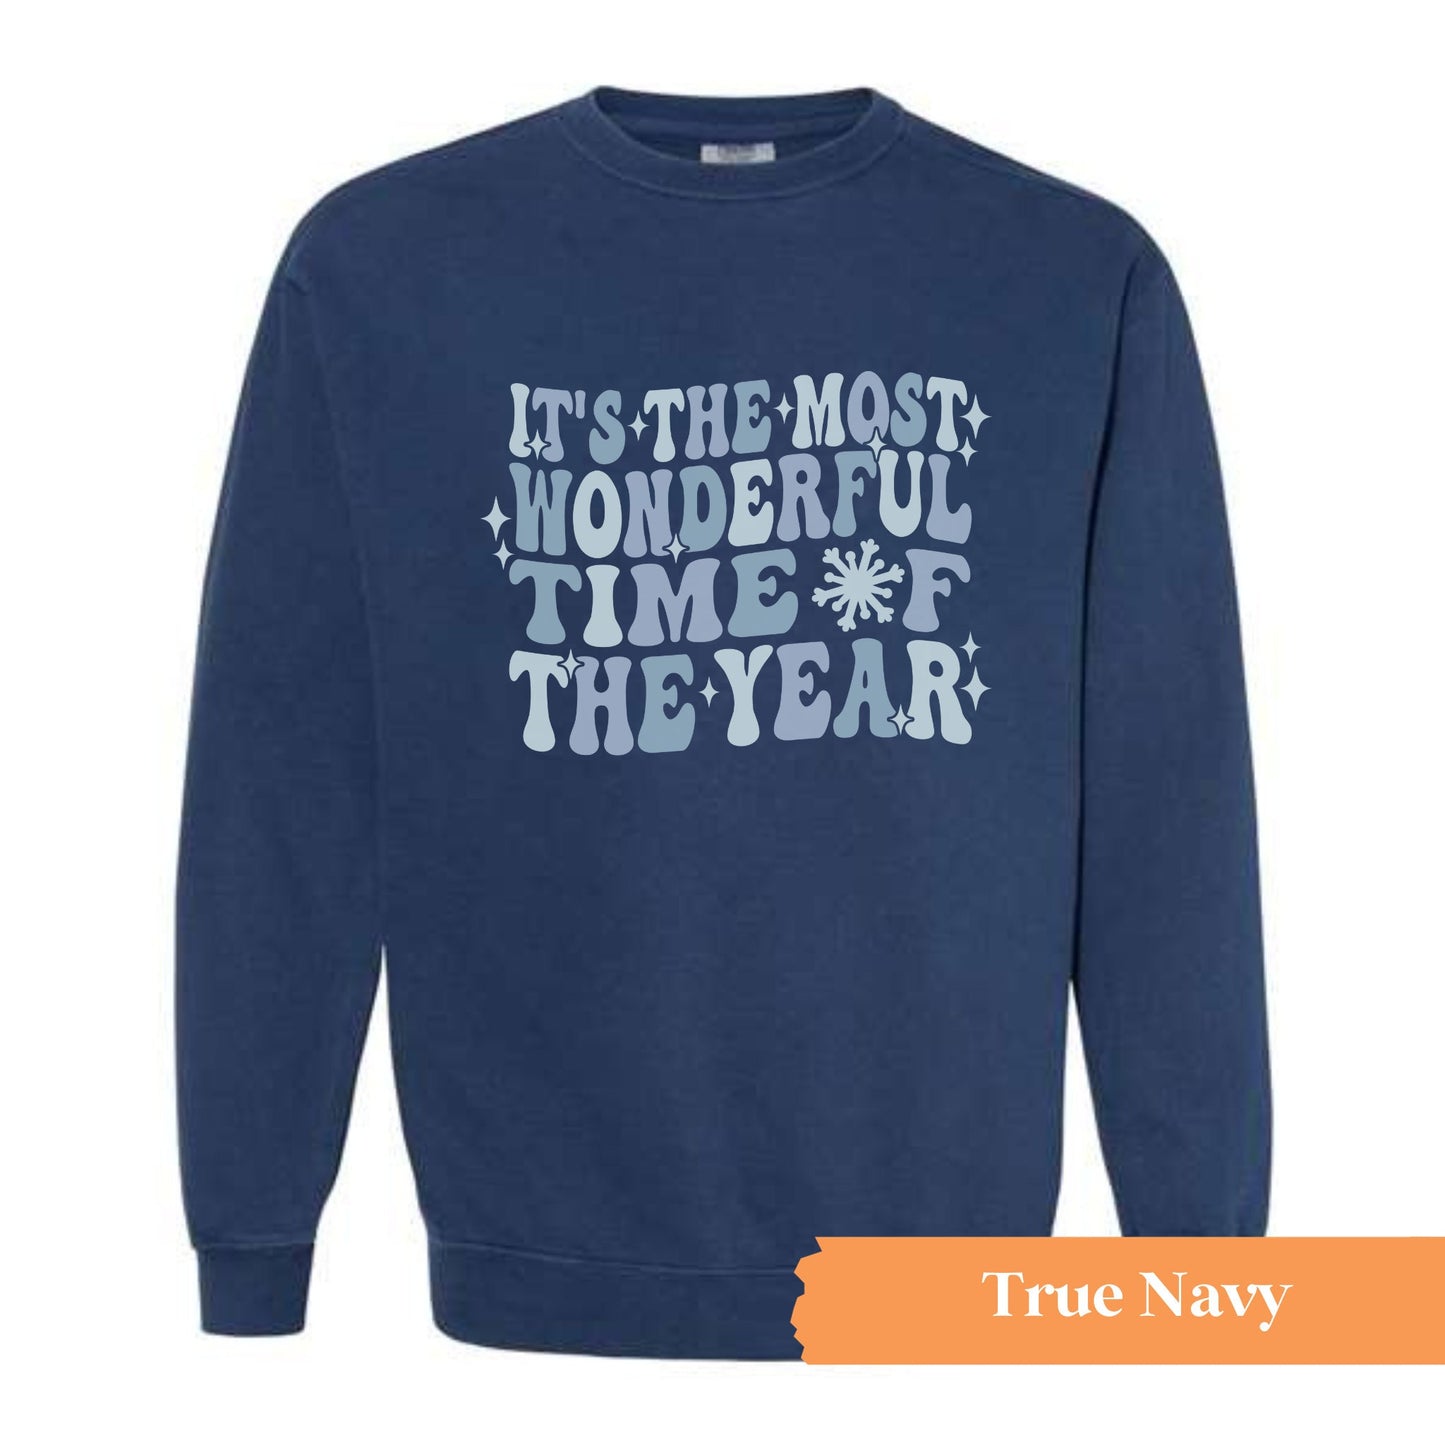 The Most Wonderful Time of the Year Crewneck Sweatshirt